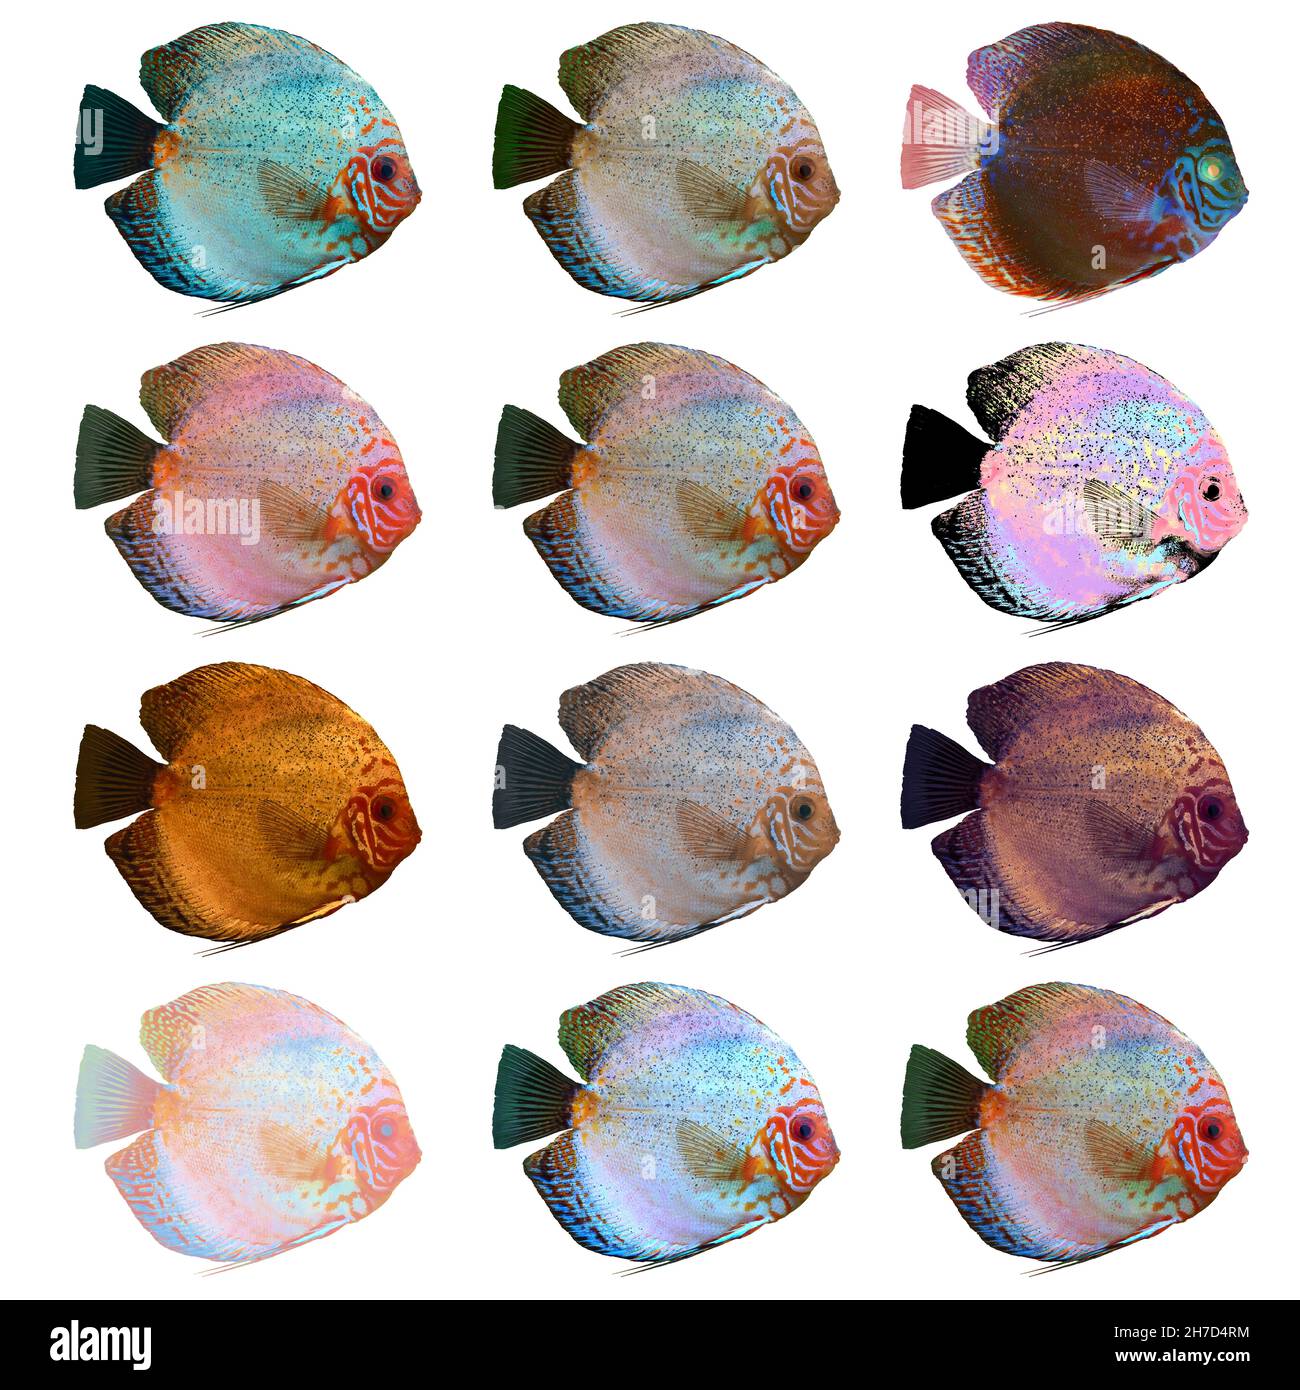 Digitally enhanced image of 12 color variations of Symphysodon, (colloquially known as discus) fresh water aquarium fish. Stock Photo